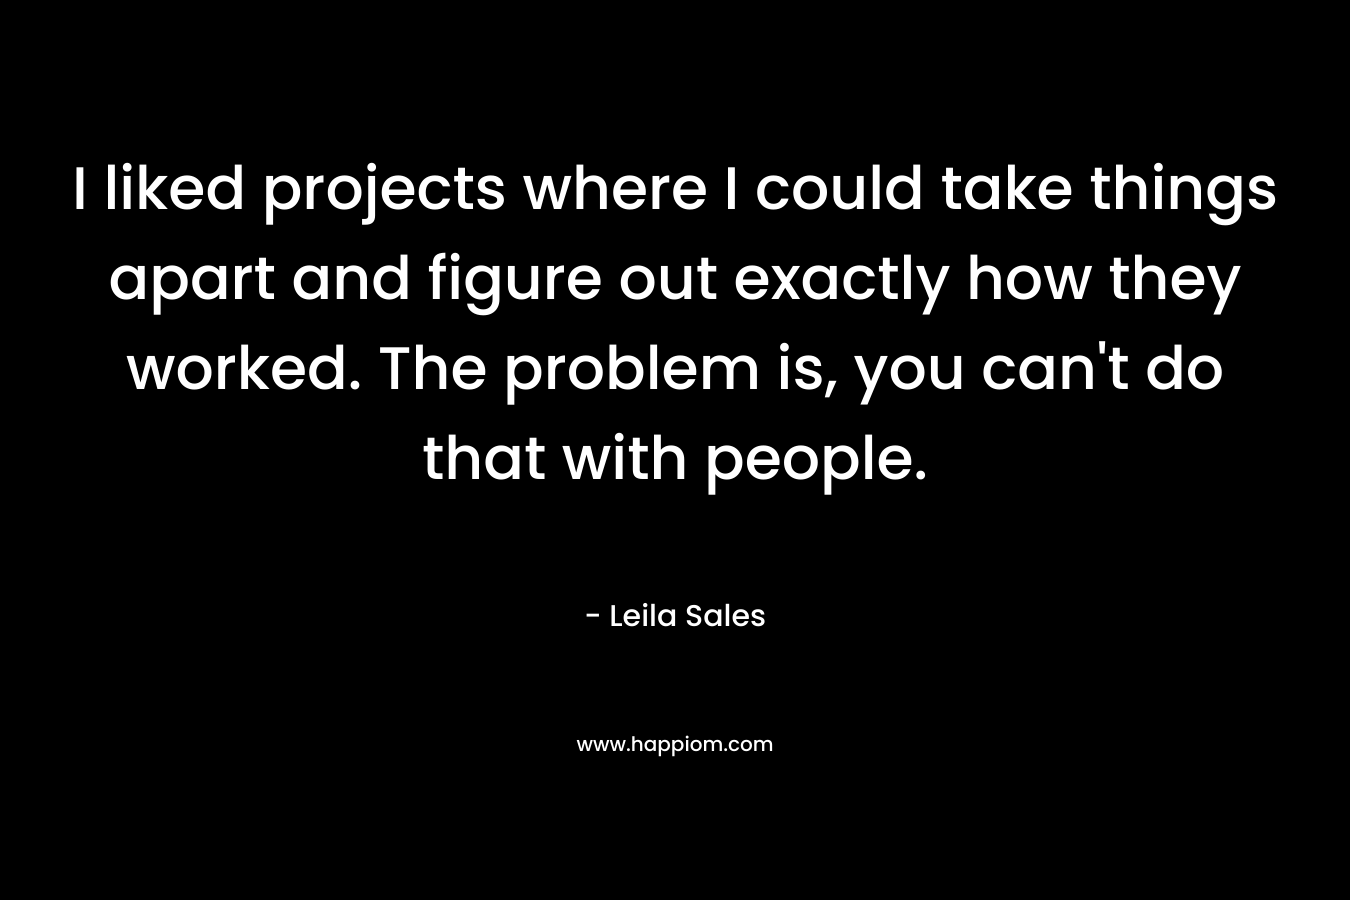 I liked projects where I could take things apart and figure out exactly how they worked. The problem is, you can’t do that with people. – Leila Sales